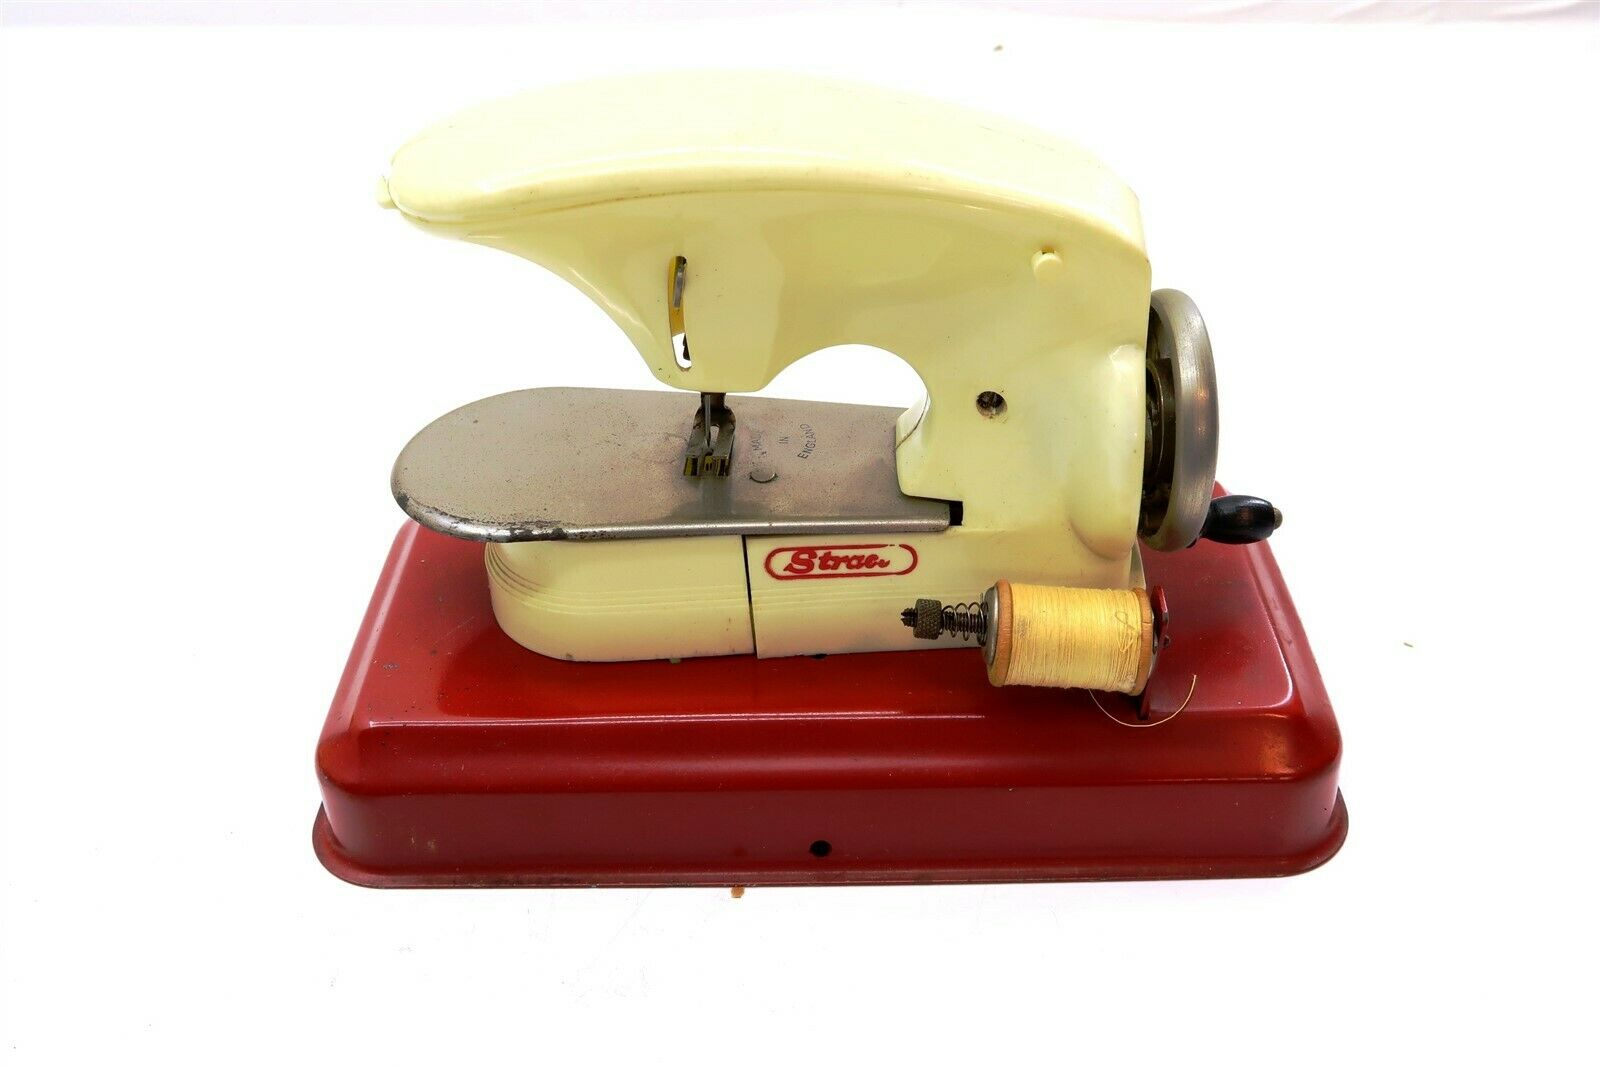 Vintage STRACO Sewing Machine Toy Miniature Hand Crank Red ~ Made in England